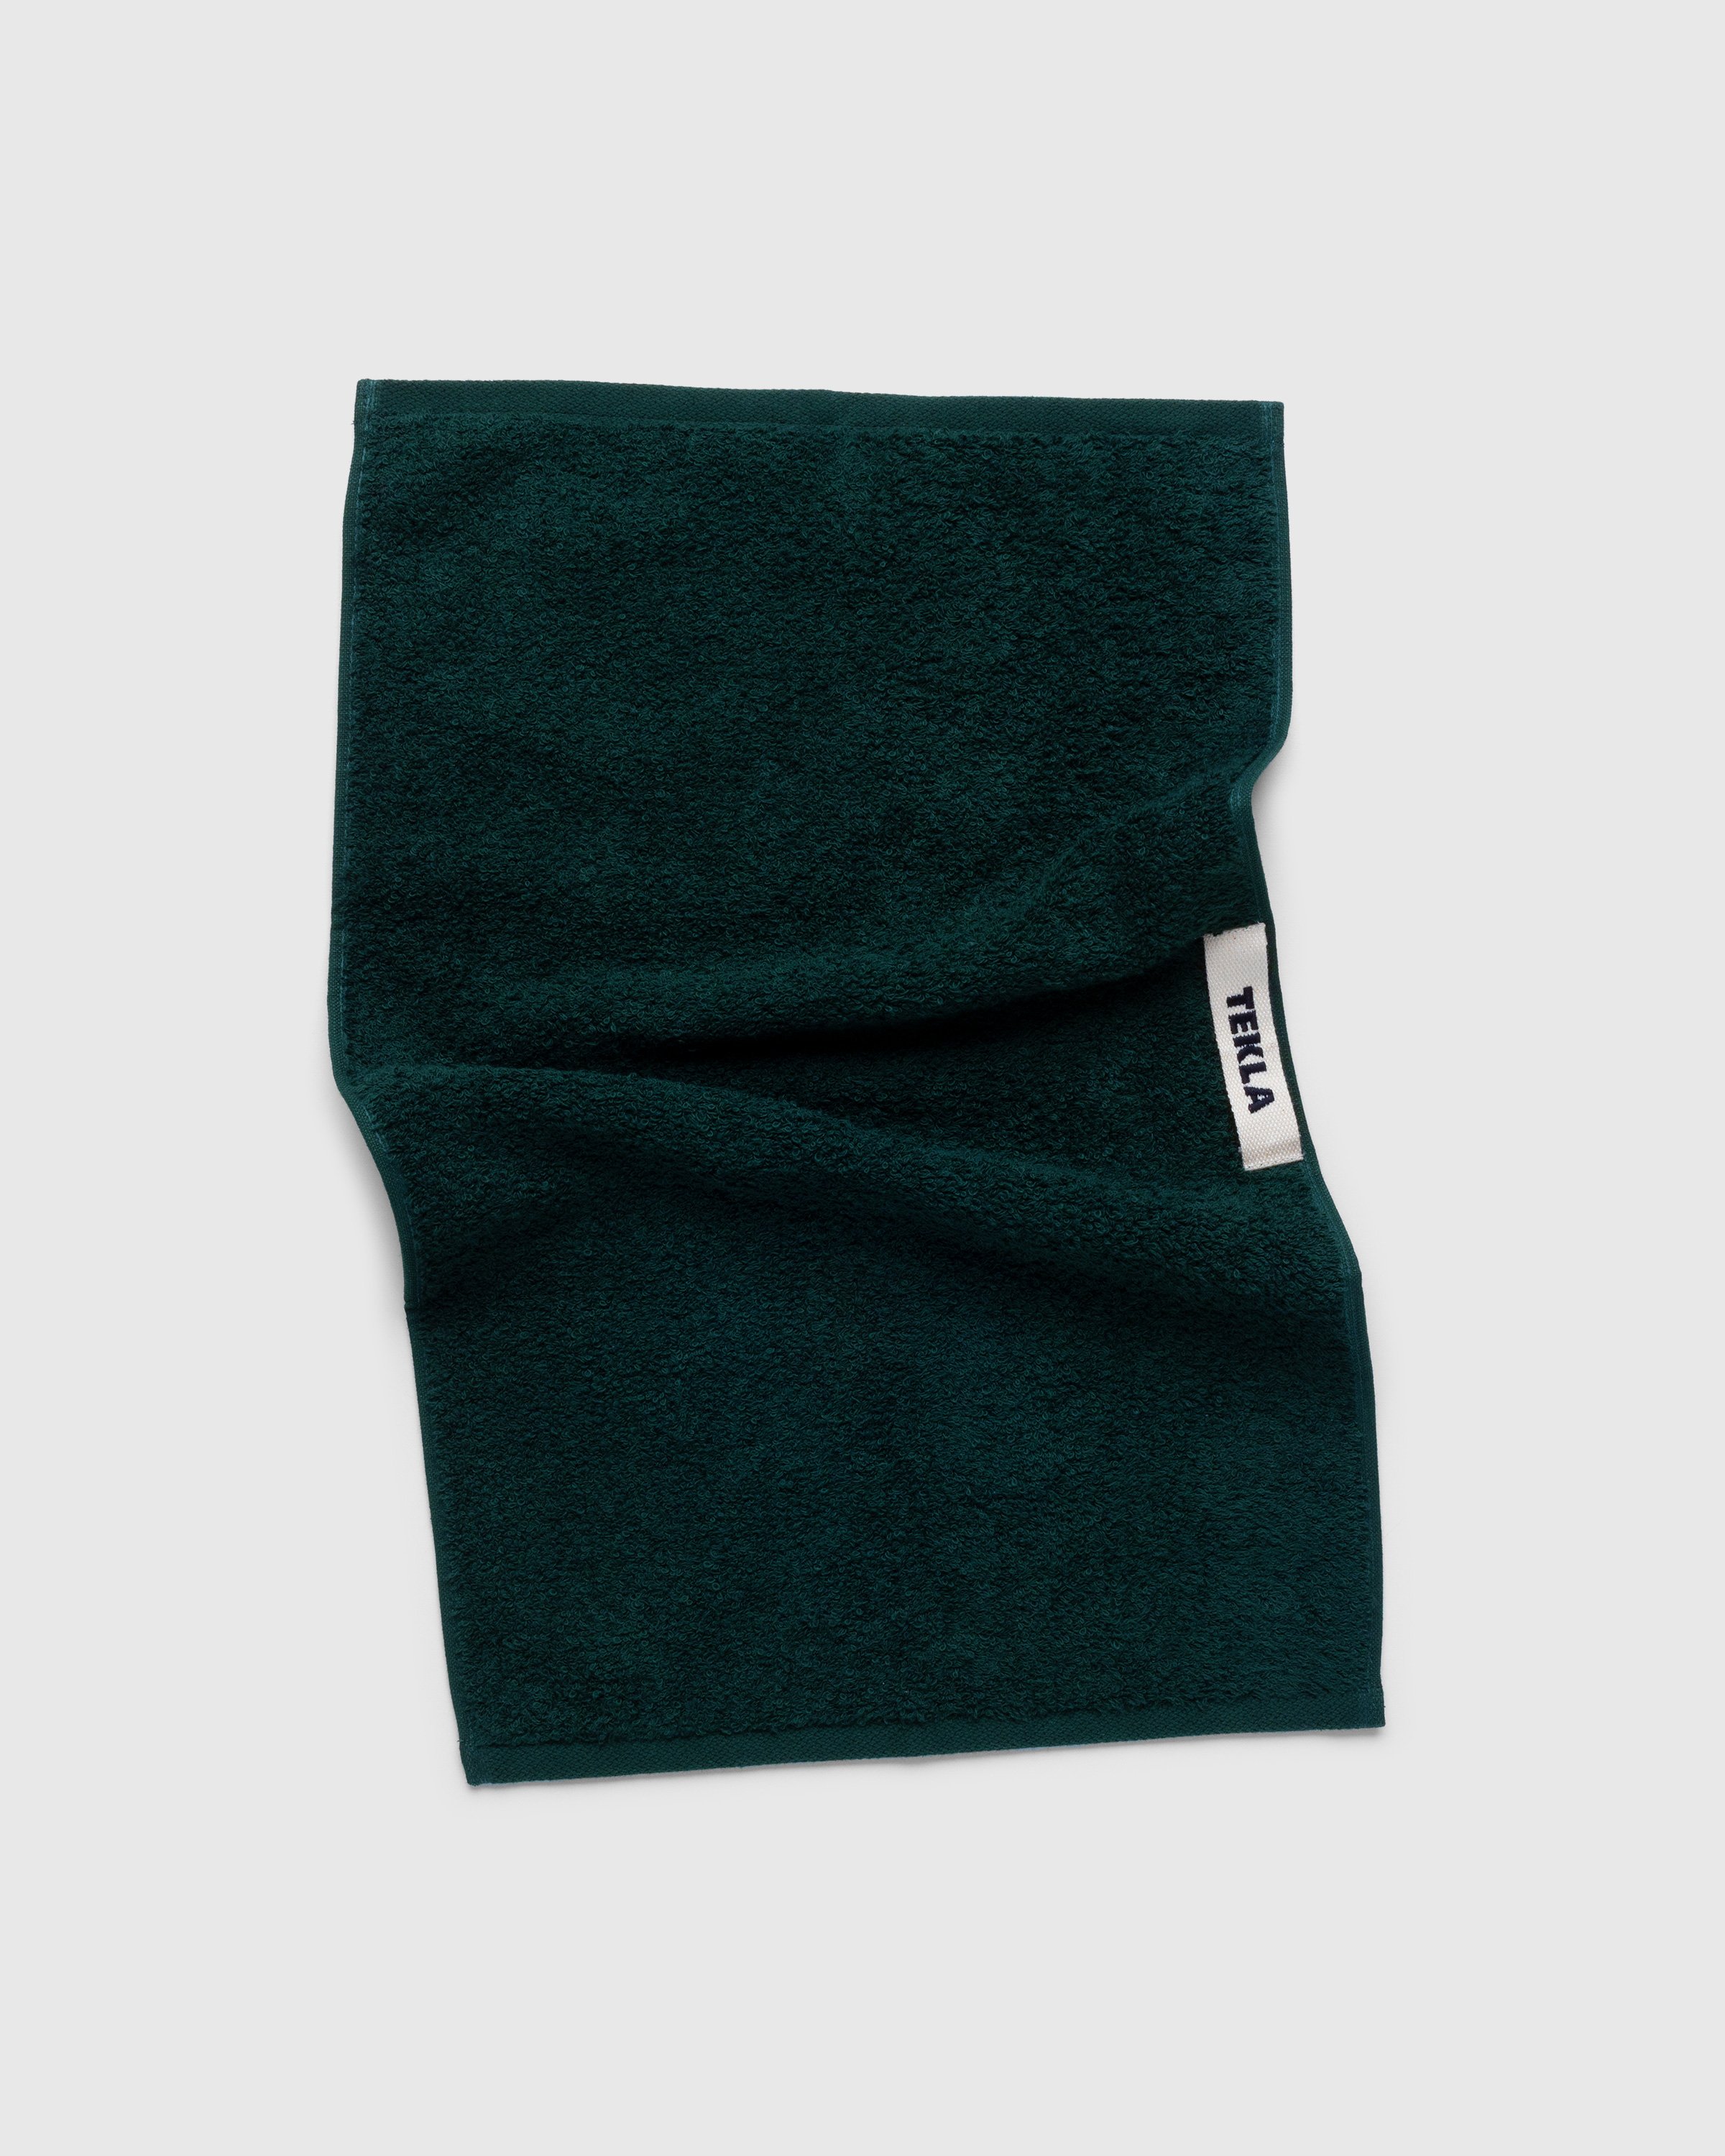 Tekla - Guest Towel Forest Green - Lifestyle - Green - Image 1